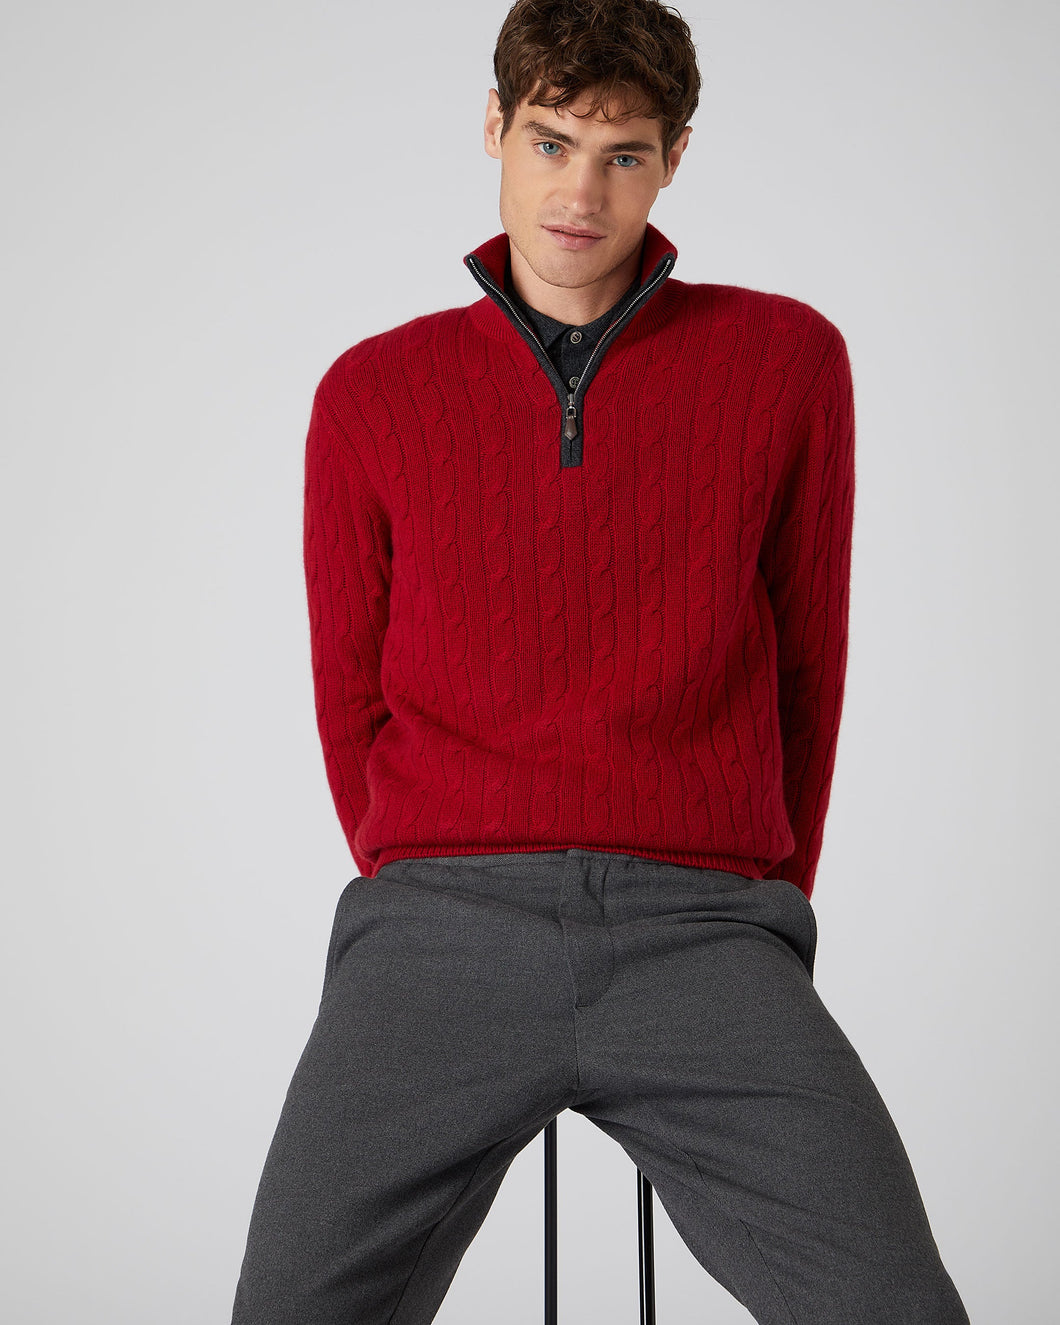 N.Peal Men's Cable Half Zip Cashmere Jumper Ruby Red